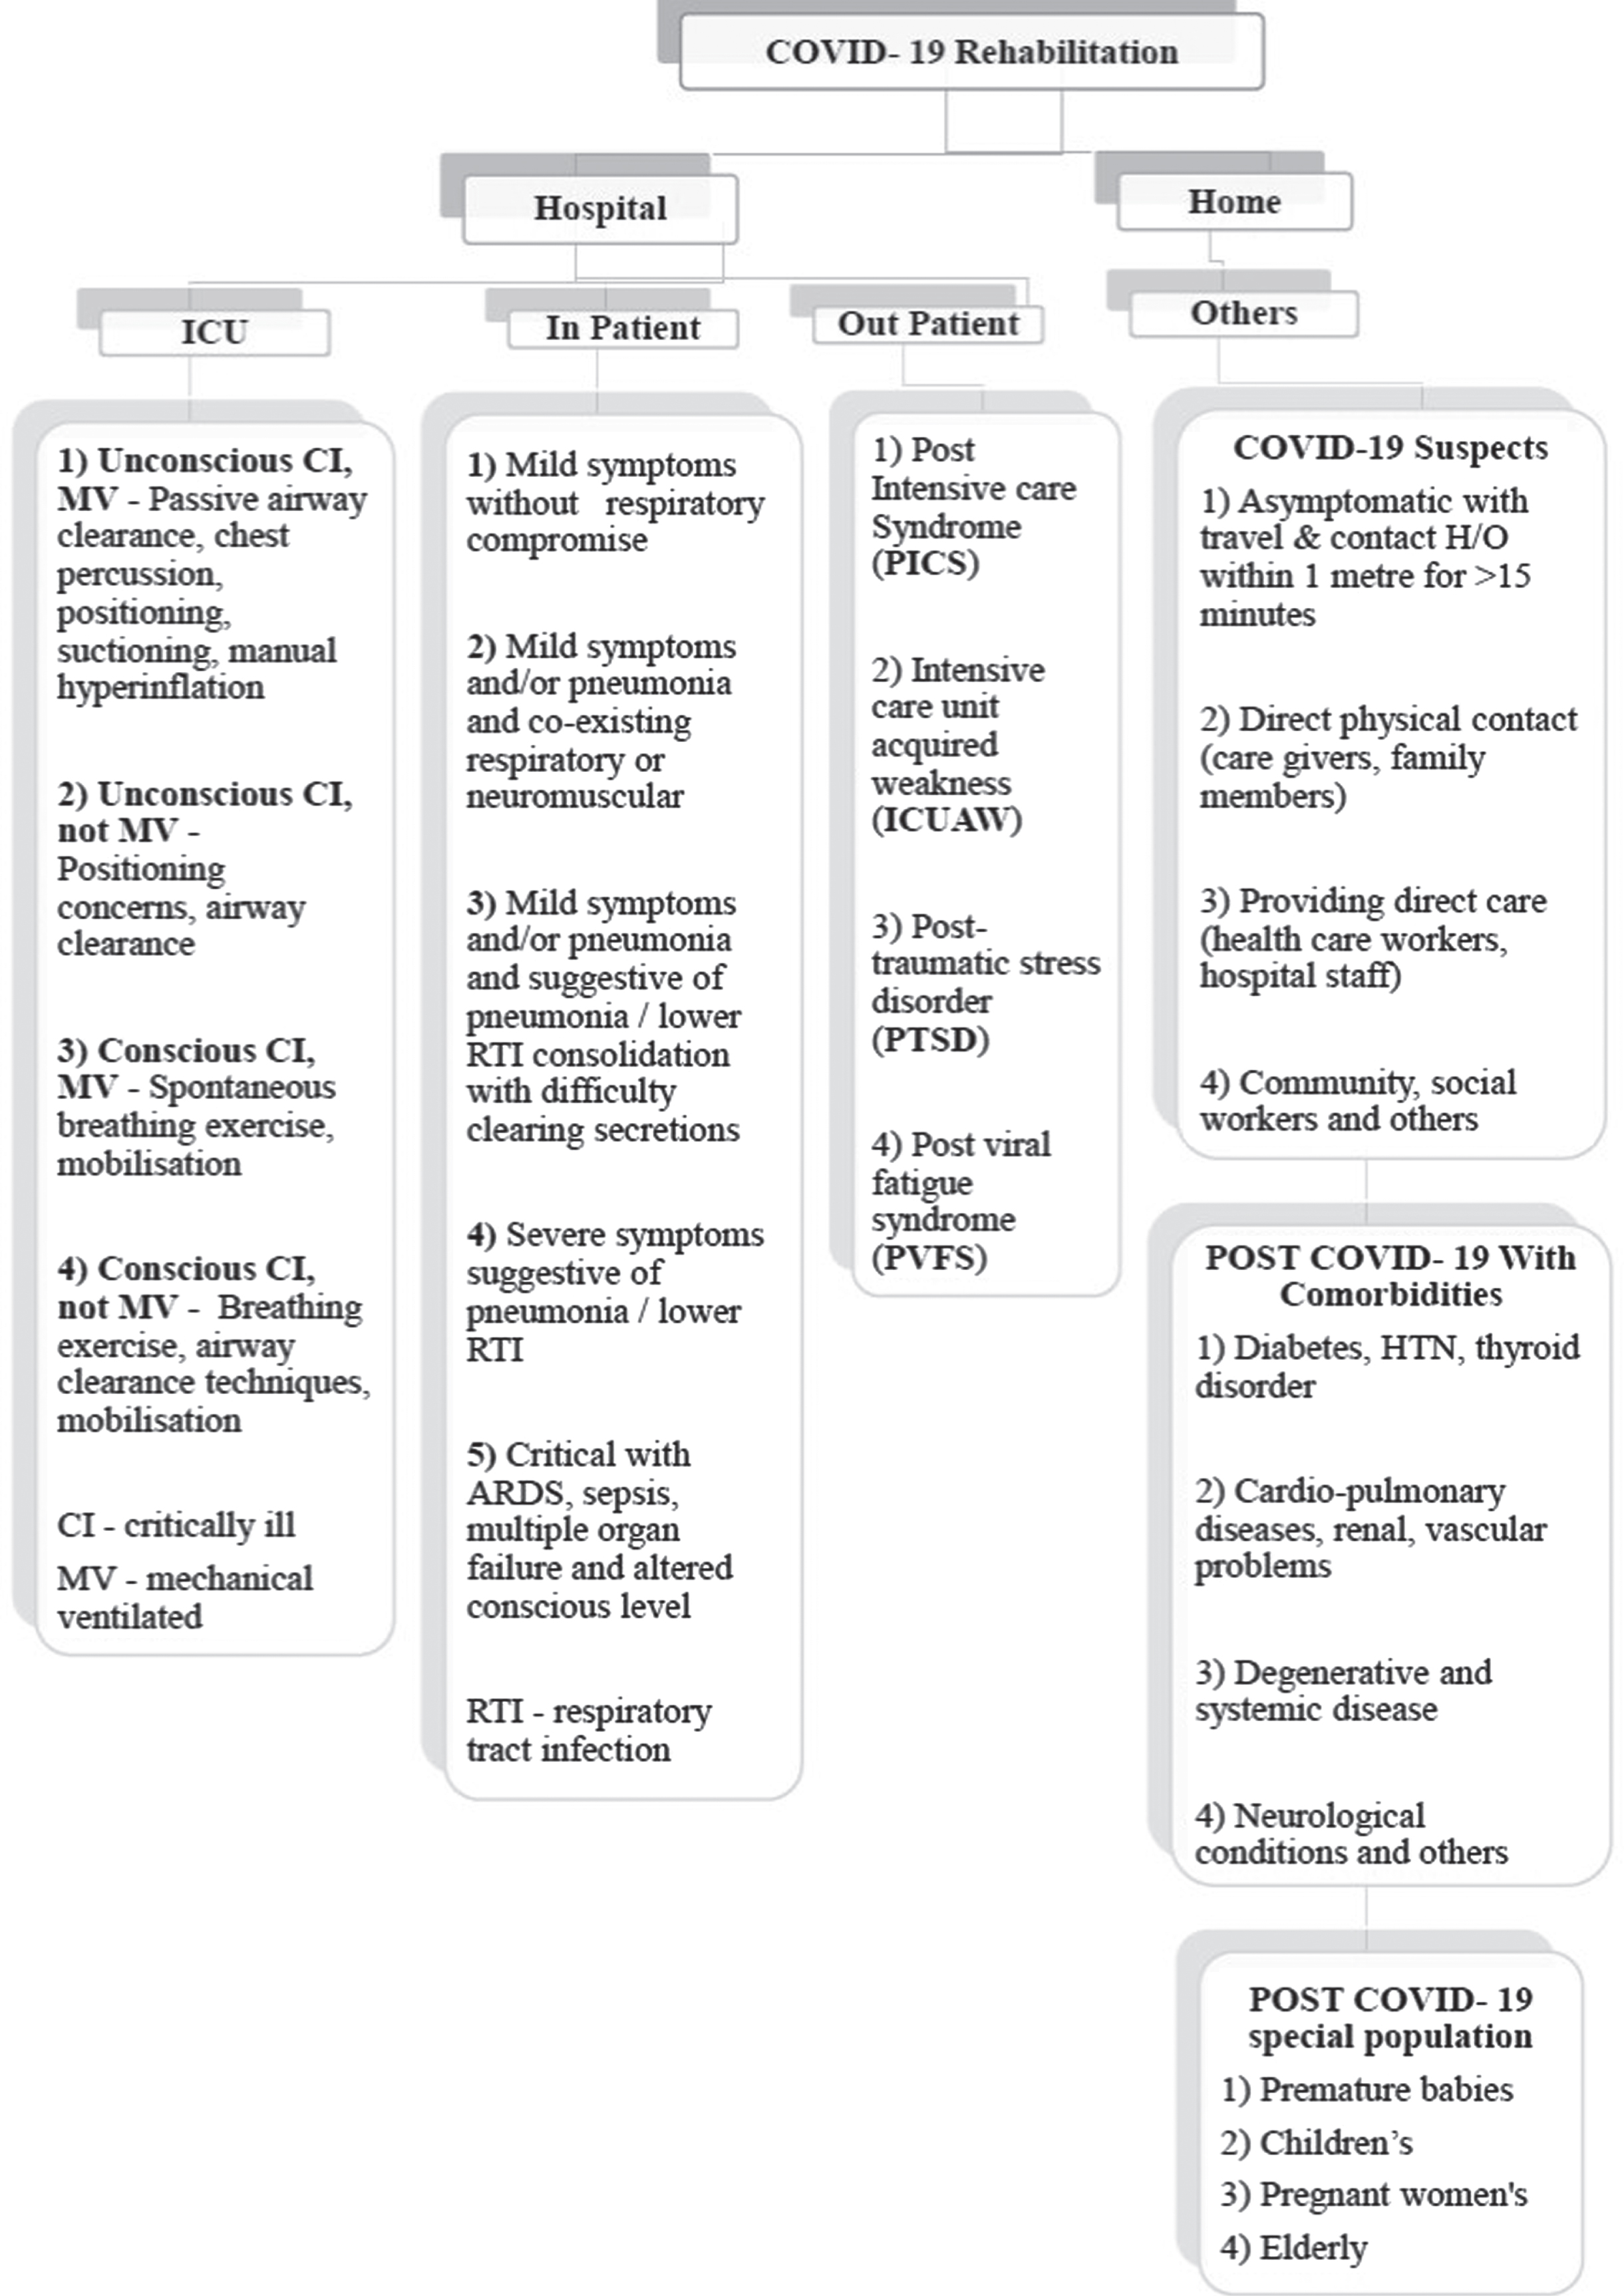 COVID-19 rehabilitation-based classification system for COVID-19 patients.